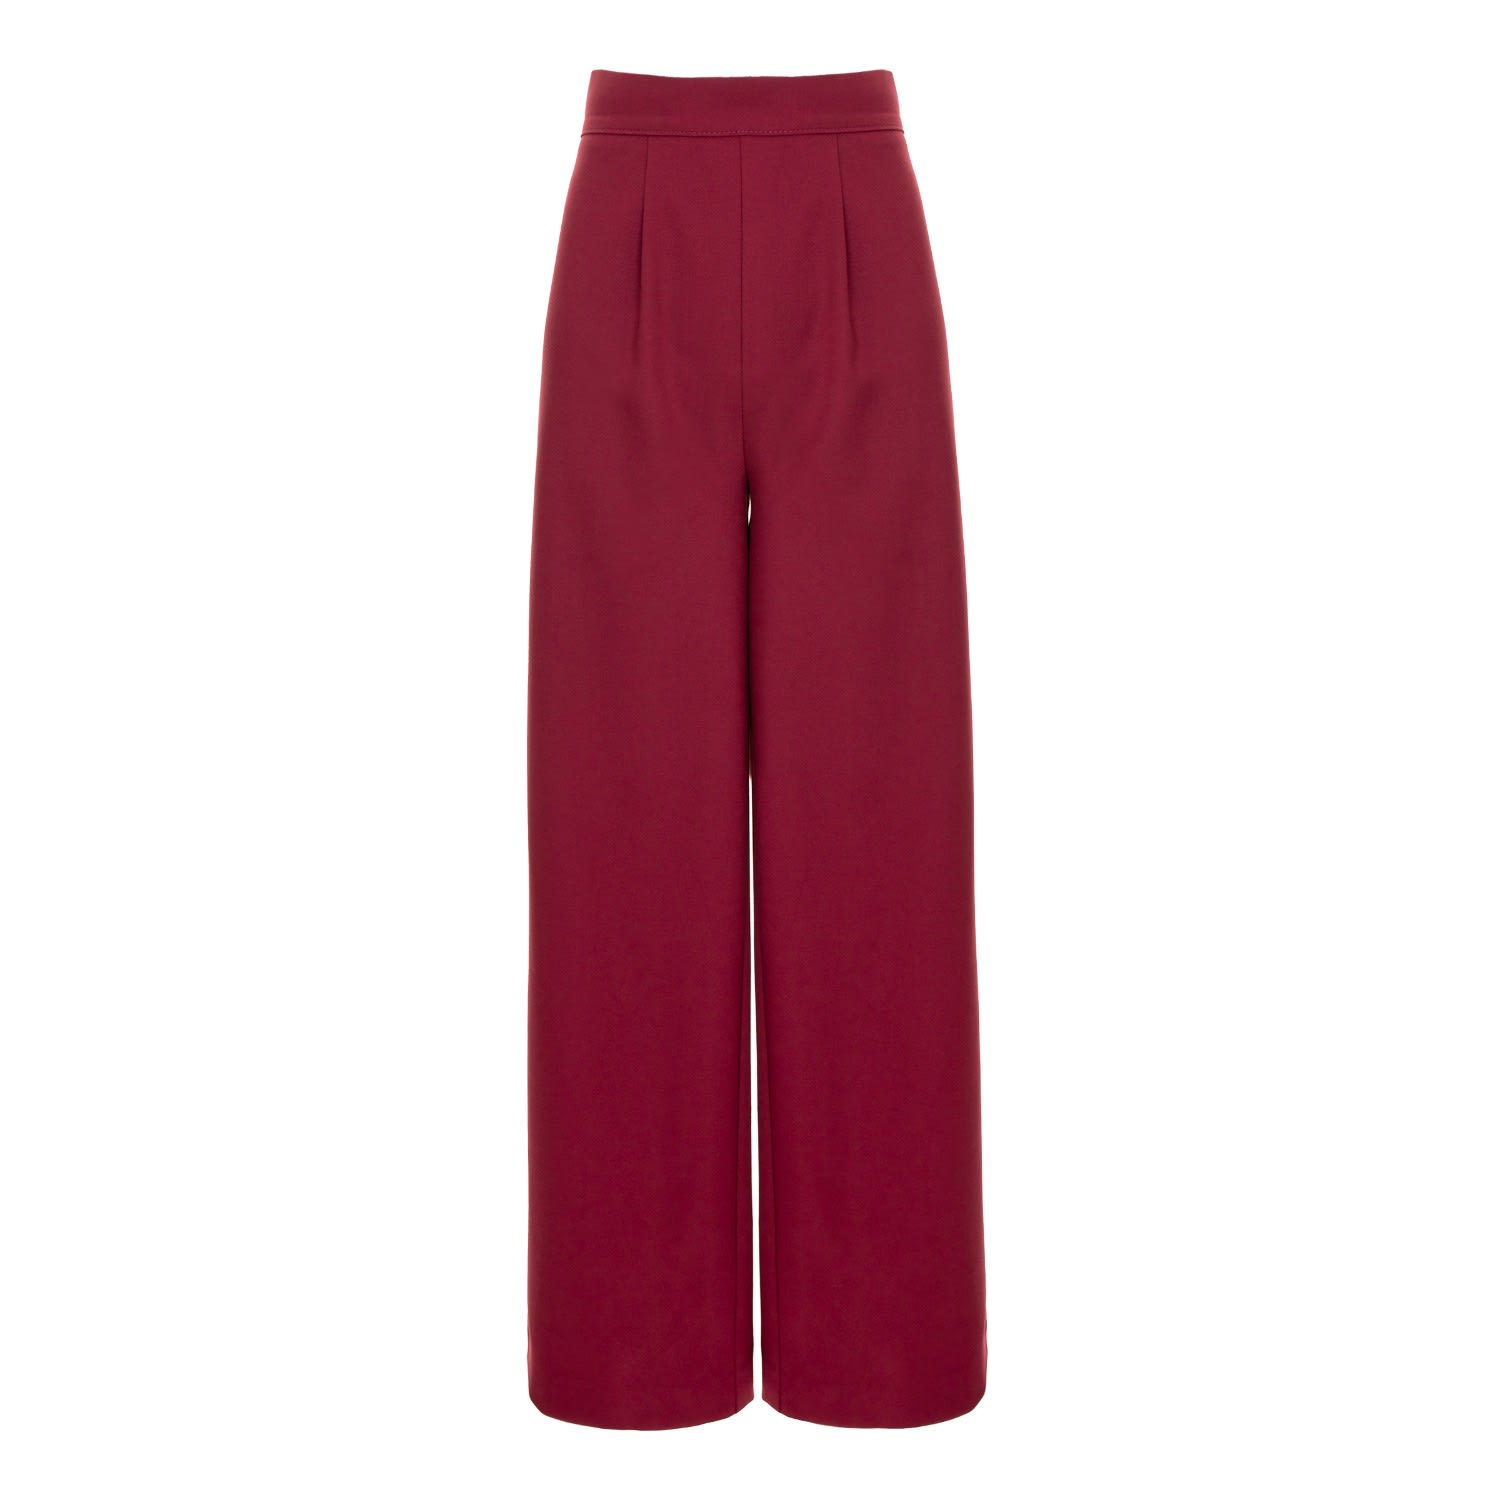 Women’s Red Wide Leg Trousers - Burgundy Small Avenue no.29